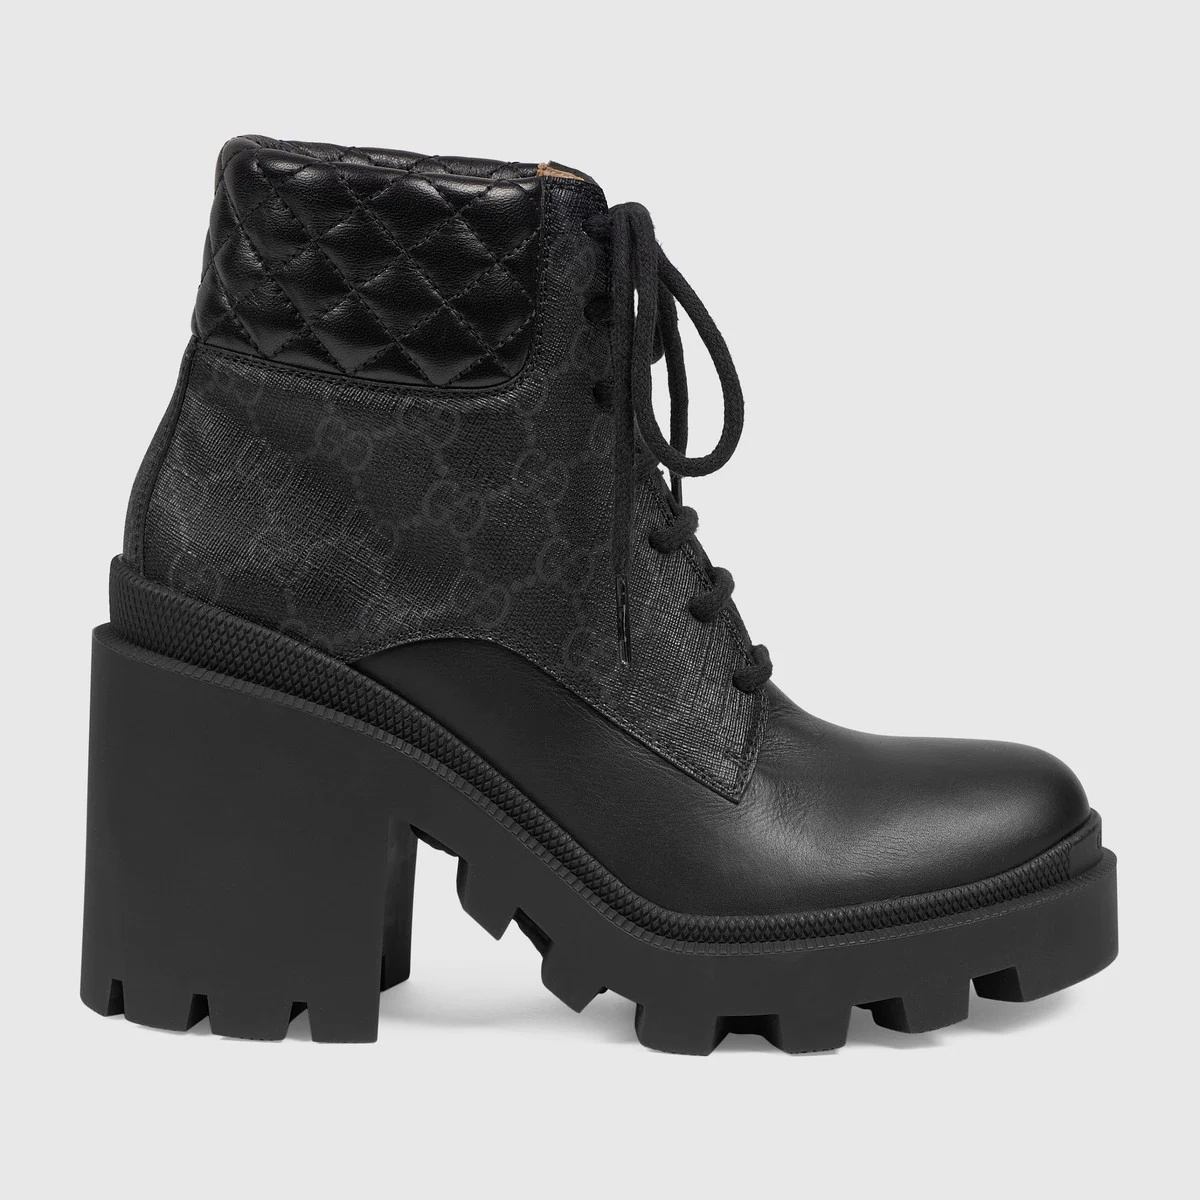 Women's GG ankle boot - 1